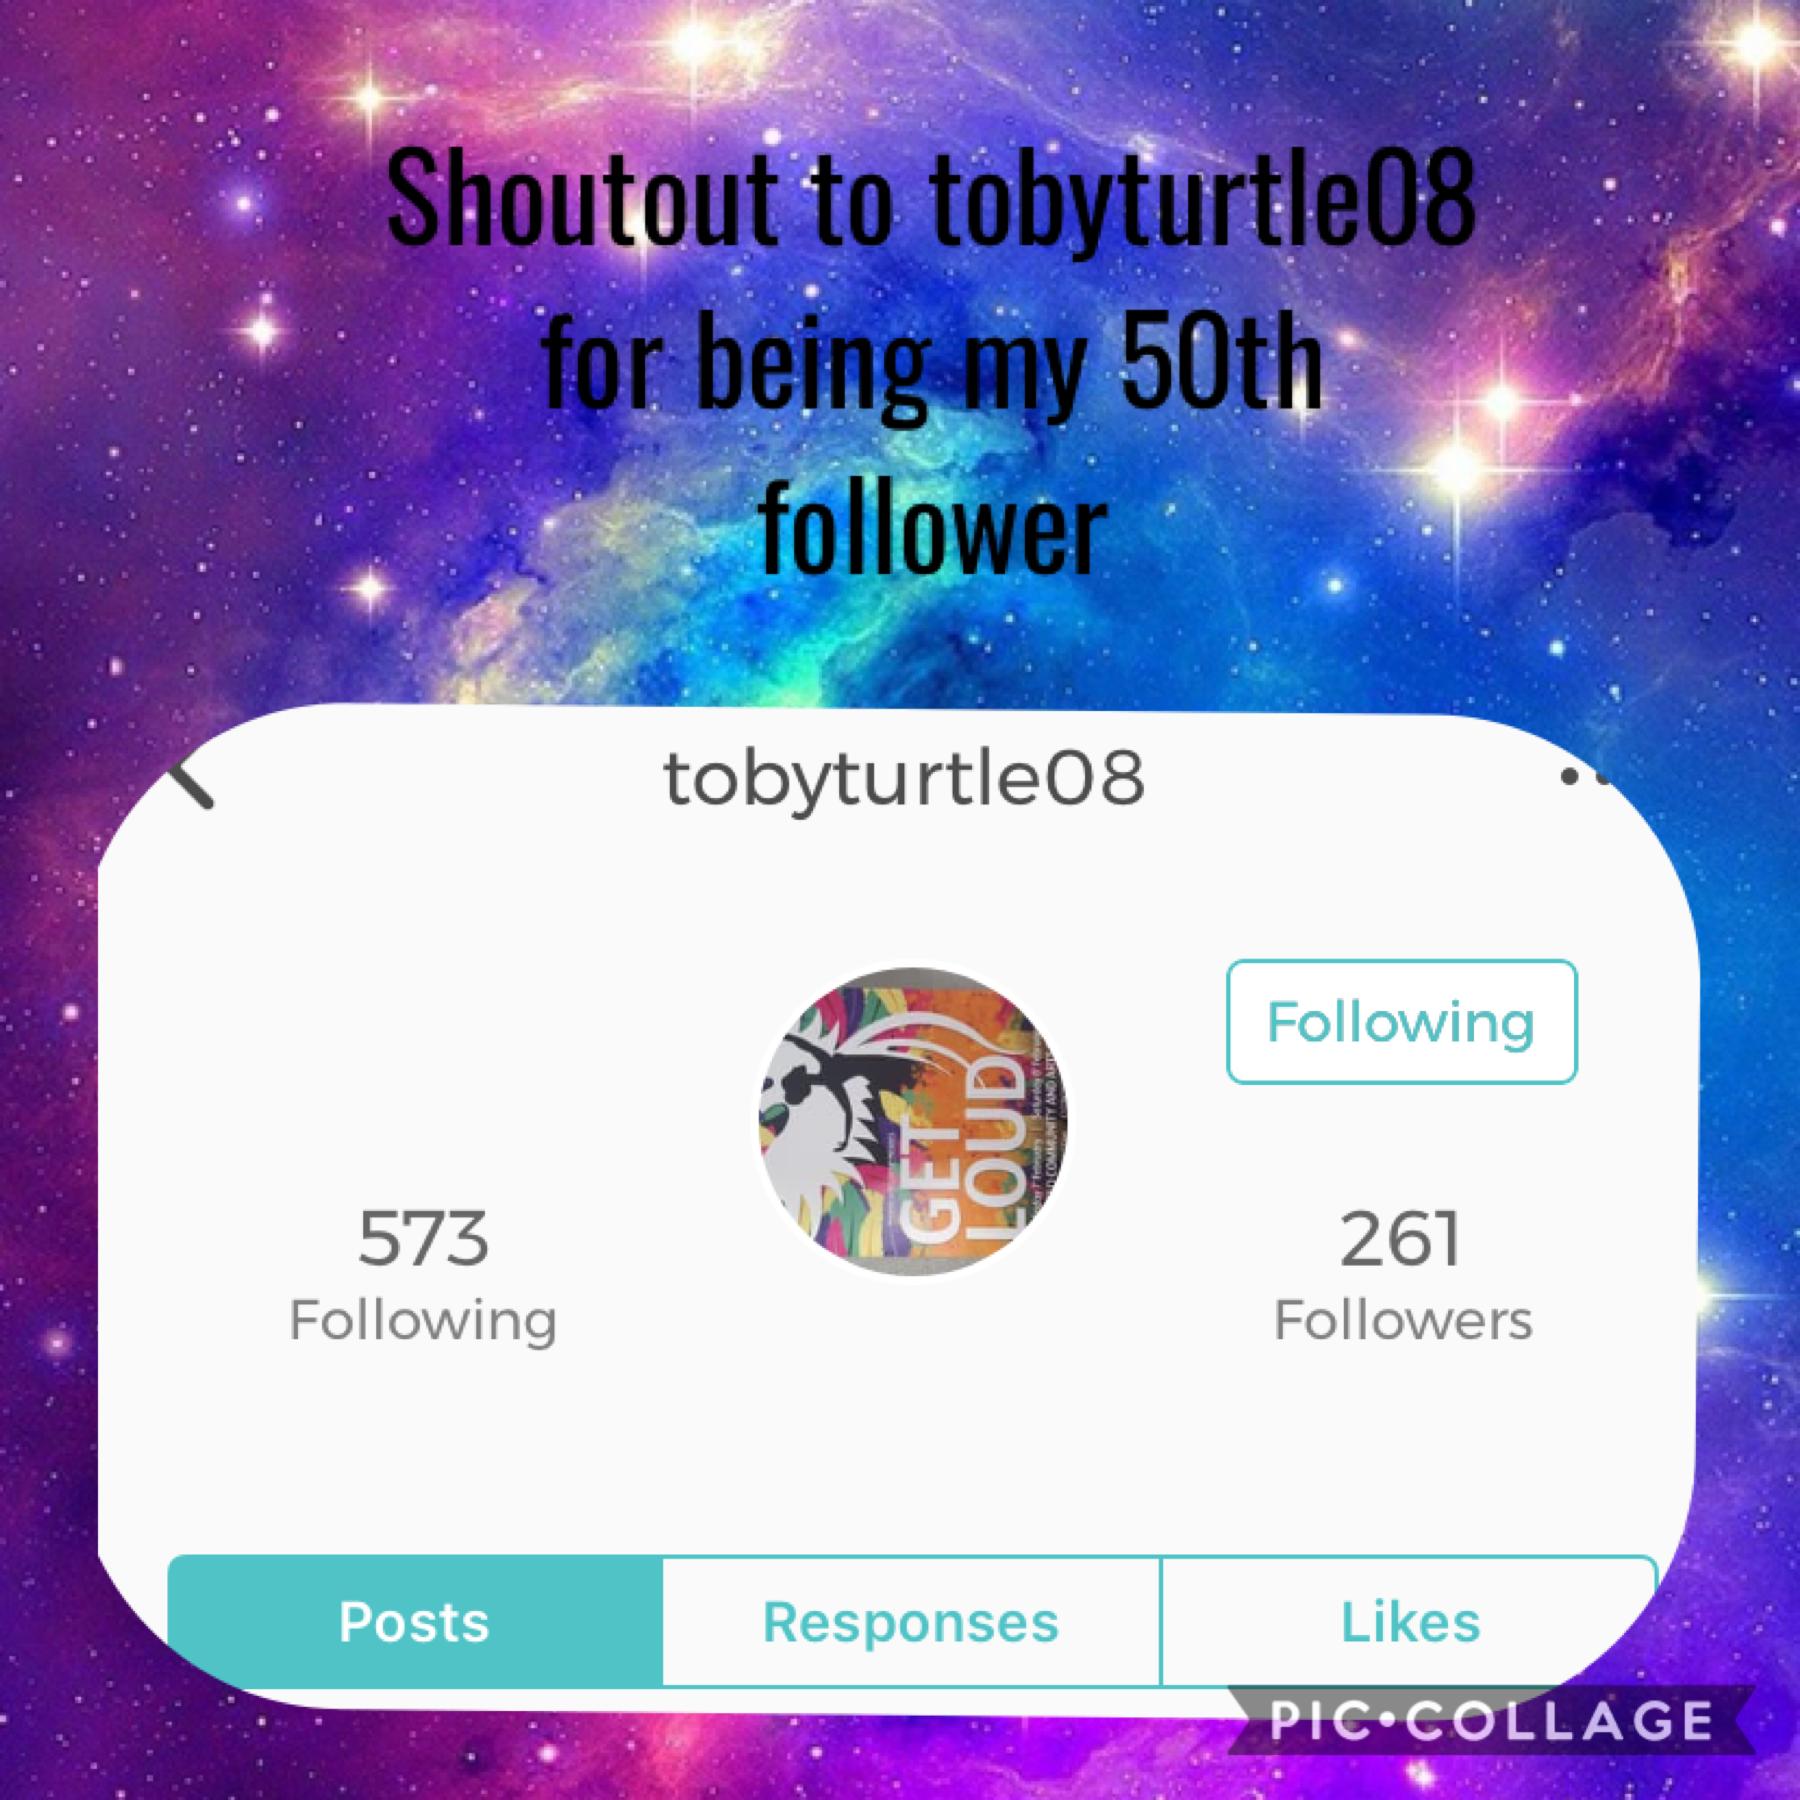 Sorry this pic collage was so late but everyone go follow tobyturtle08!!